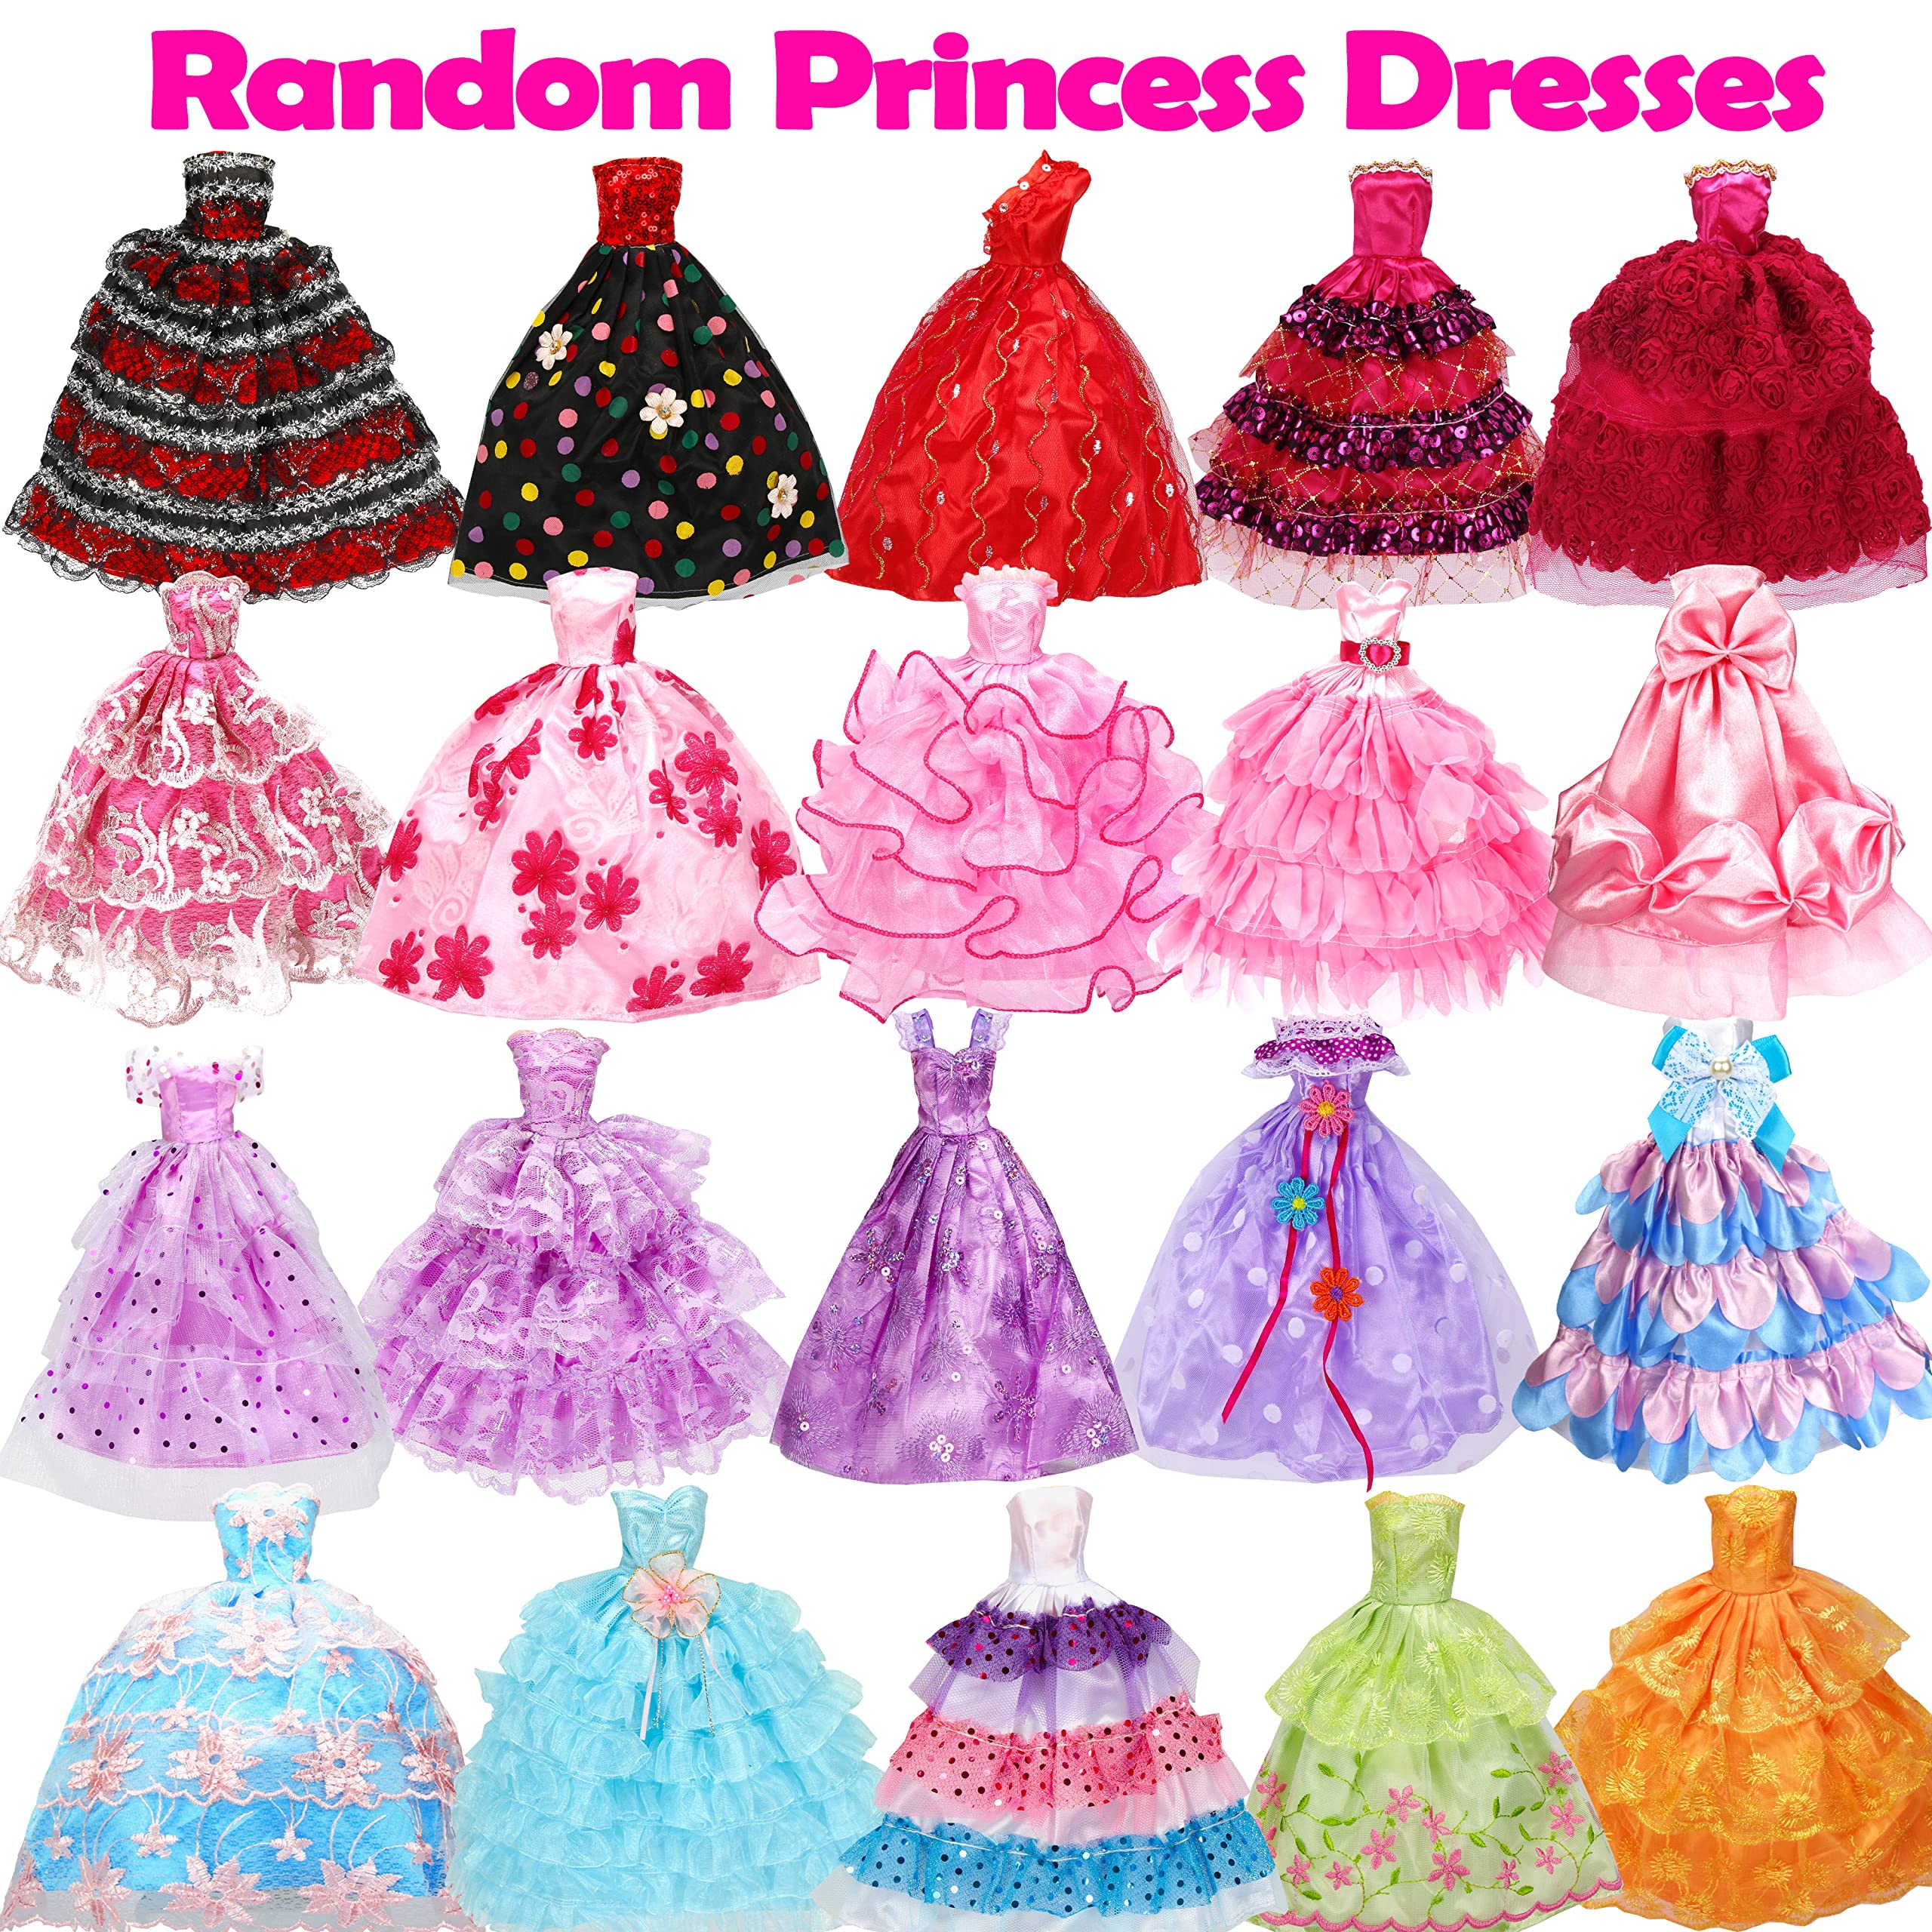 50 Pcs Doll Clothes and Accessories, 5 Wedding Gowns 5 Fashion Dresses 4 Slip Dresses 3 Tops 3 Pants 3 Bikini Swimsuits 20 Shoes for 11.5 inch Doll Christmas Stocking Stuffers Girls Gift Age 5-7 8-10